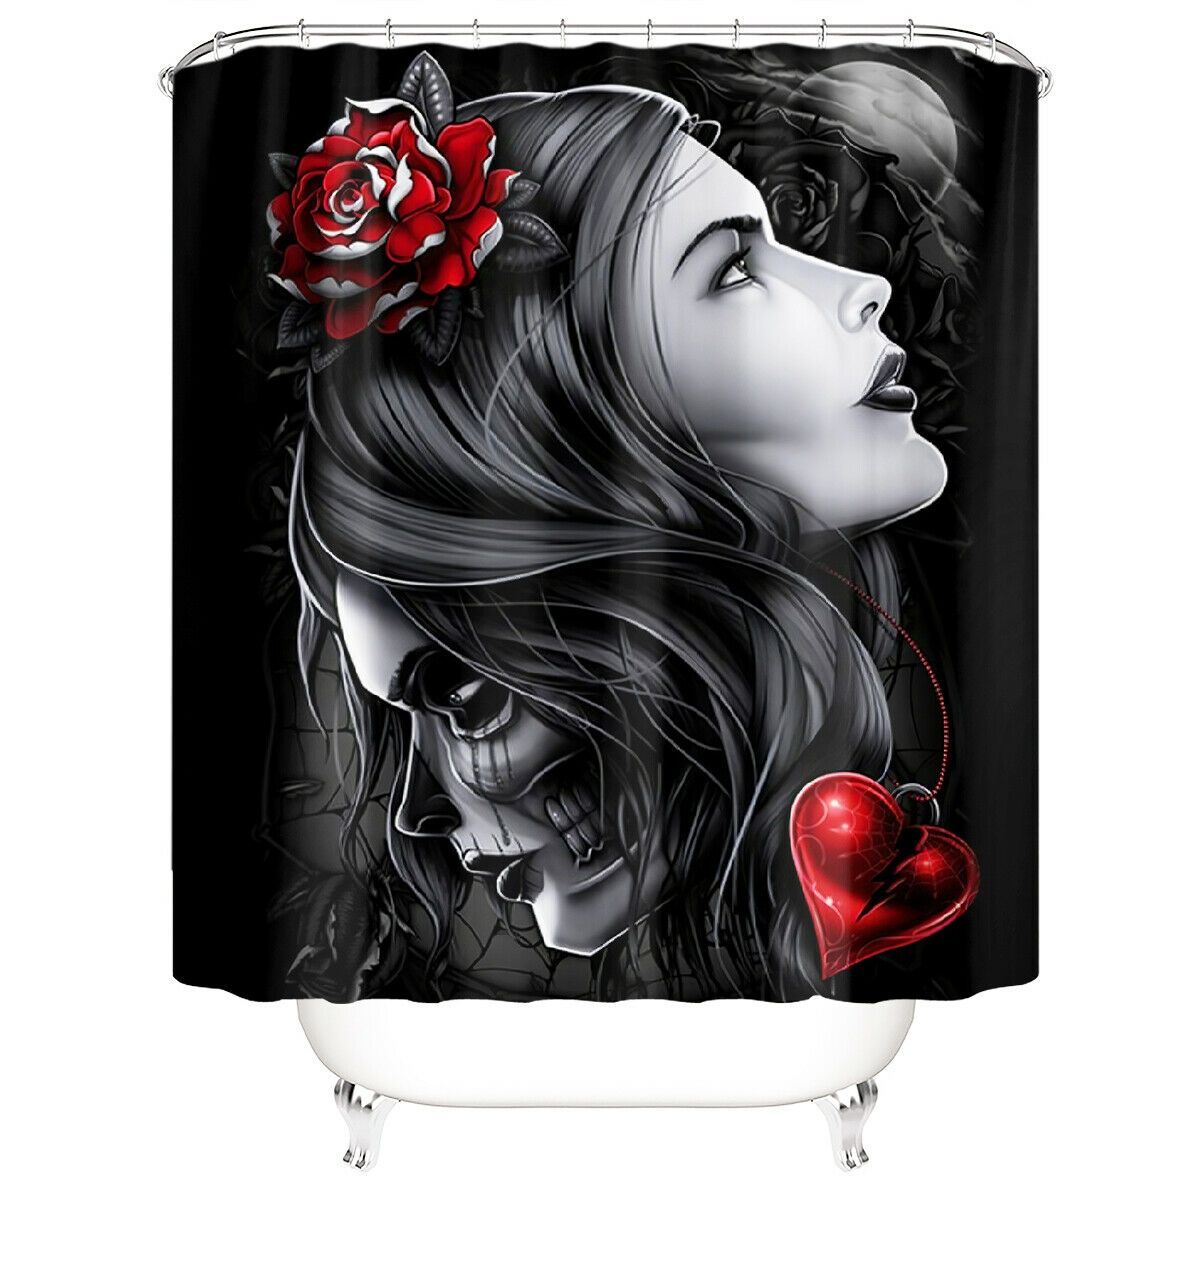 Angels Demons Fabric Shower Curtain-STYLEGOING